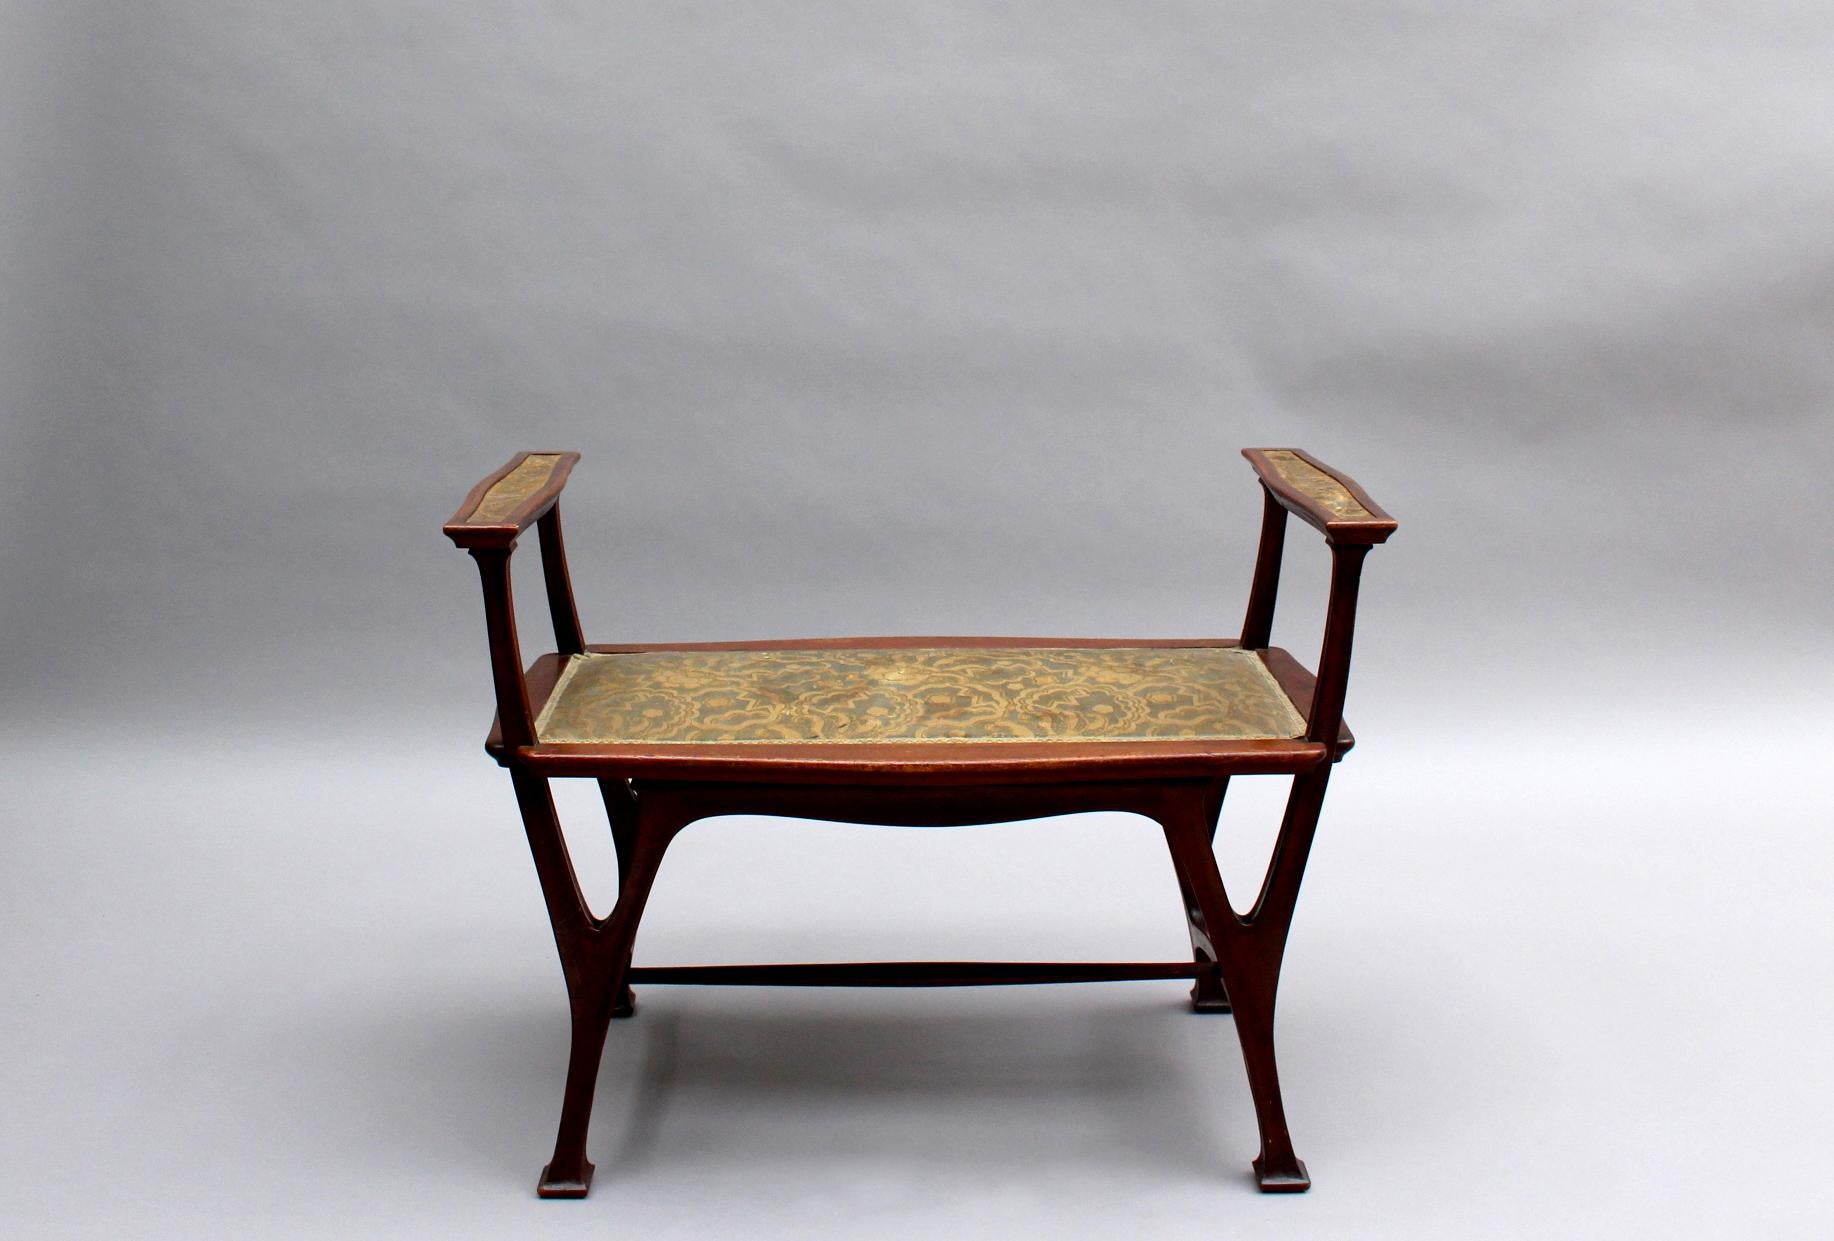 A fine French Art Nouveau upholstered mahogany bench.